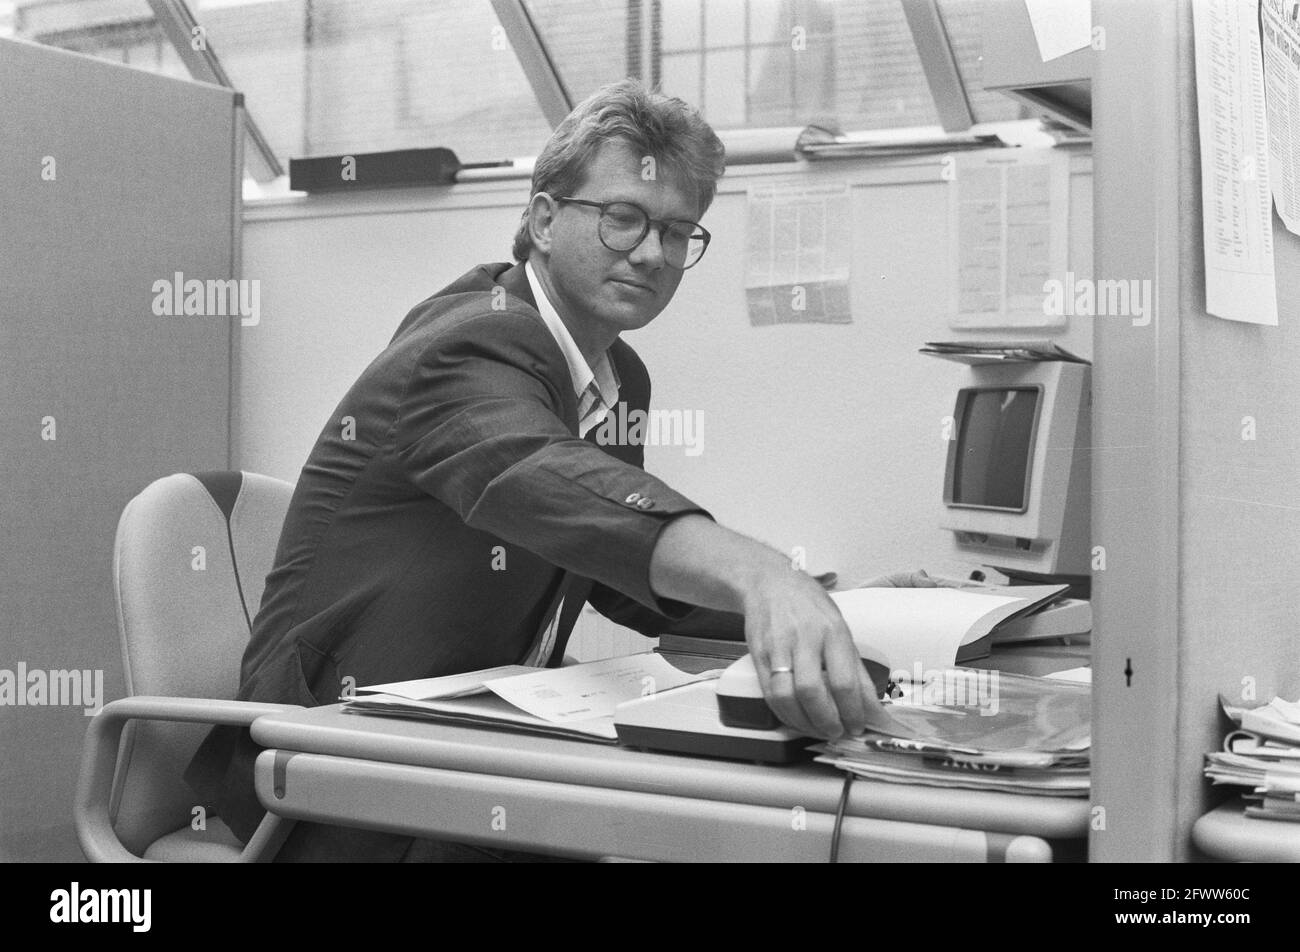 Assignment CNV Dienstenbond, September 30, 1988, The Netherlands, 20th century press agency photo, news to remember, documentary, historic photography 1945-1990, visual stories, human history of the Twentieth Century, capturing moments in time Stock Photo